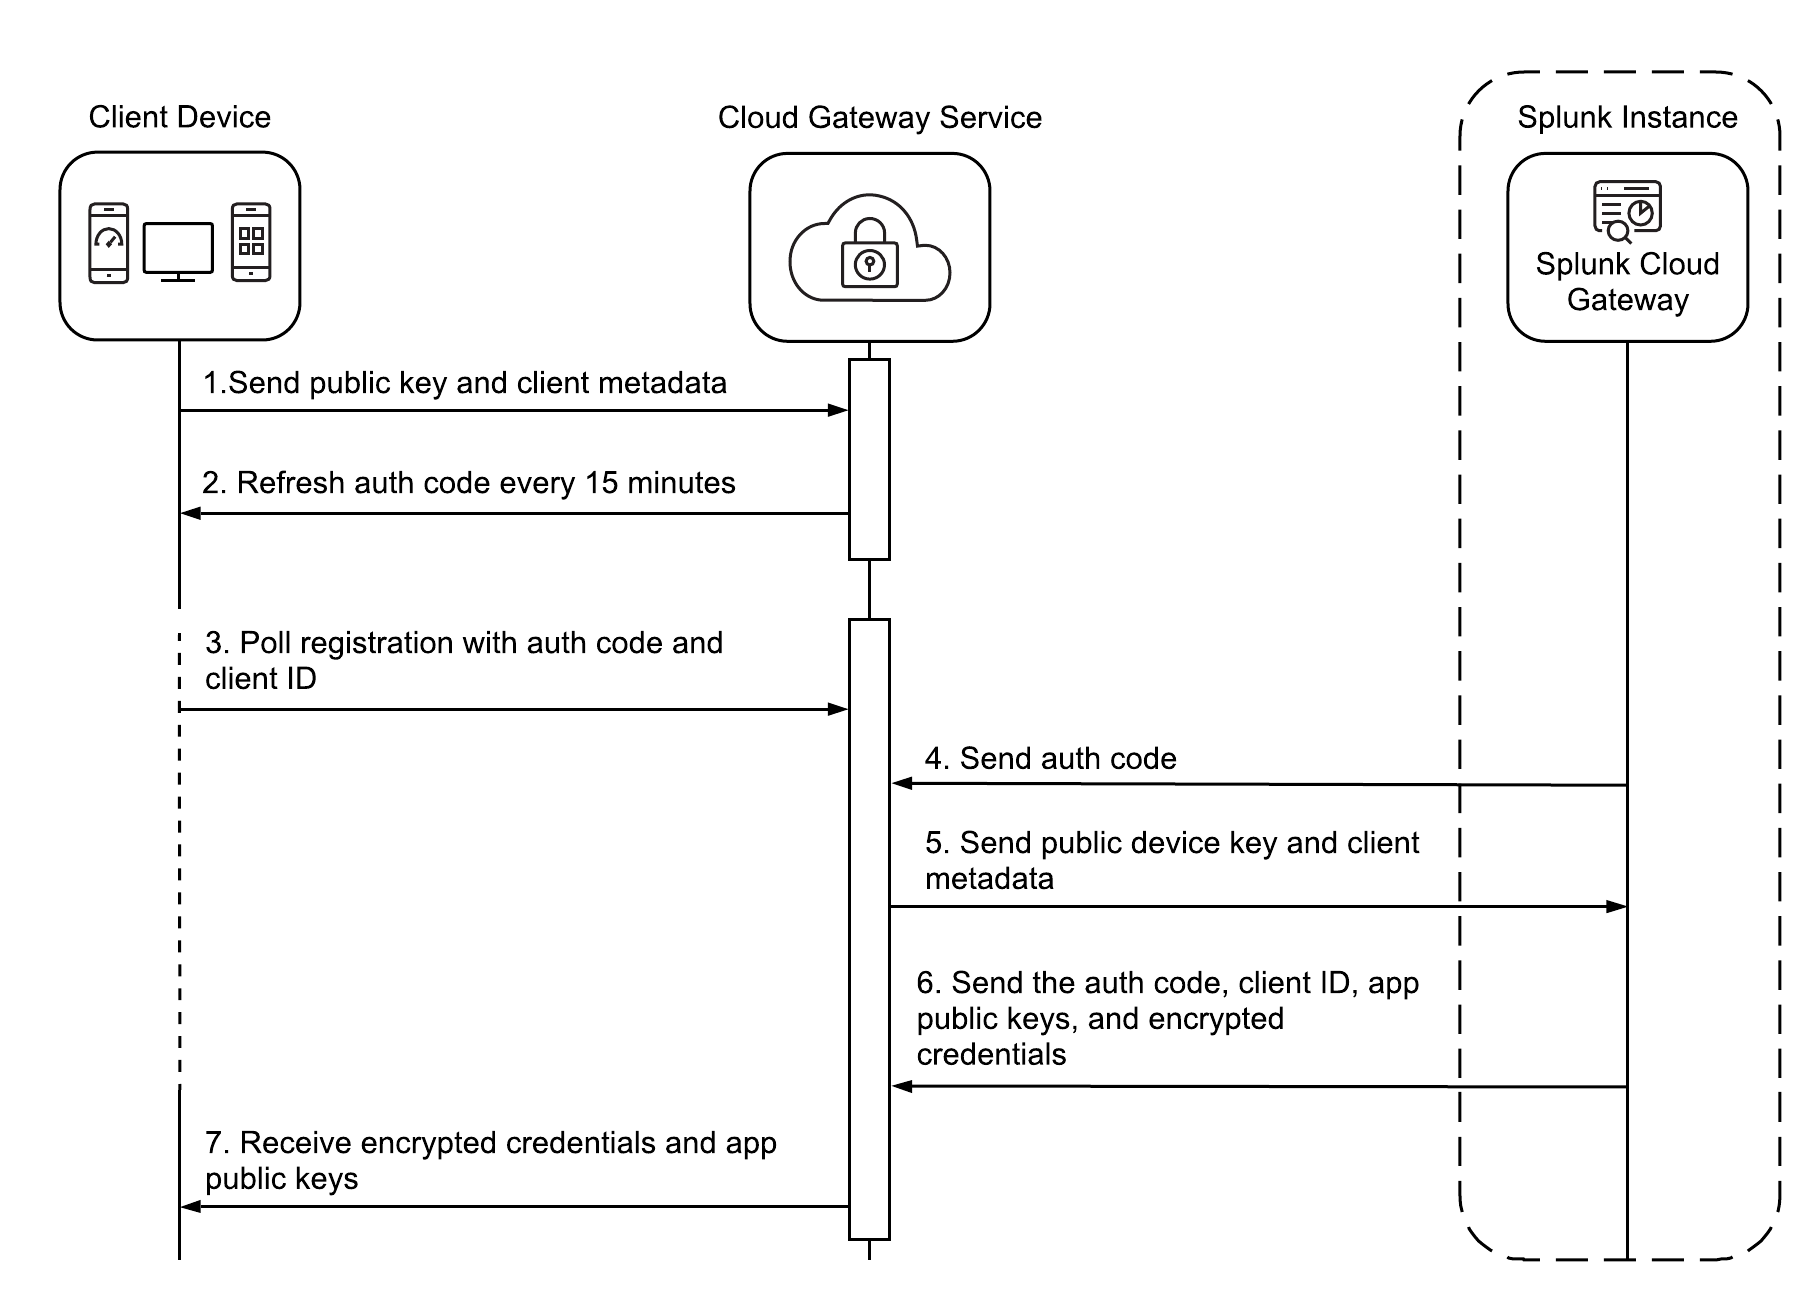 This diagram shows the step-by-step device registration process